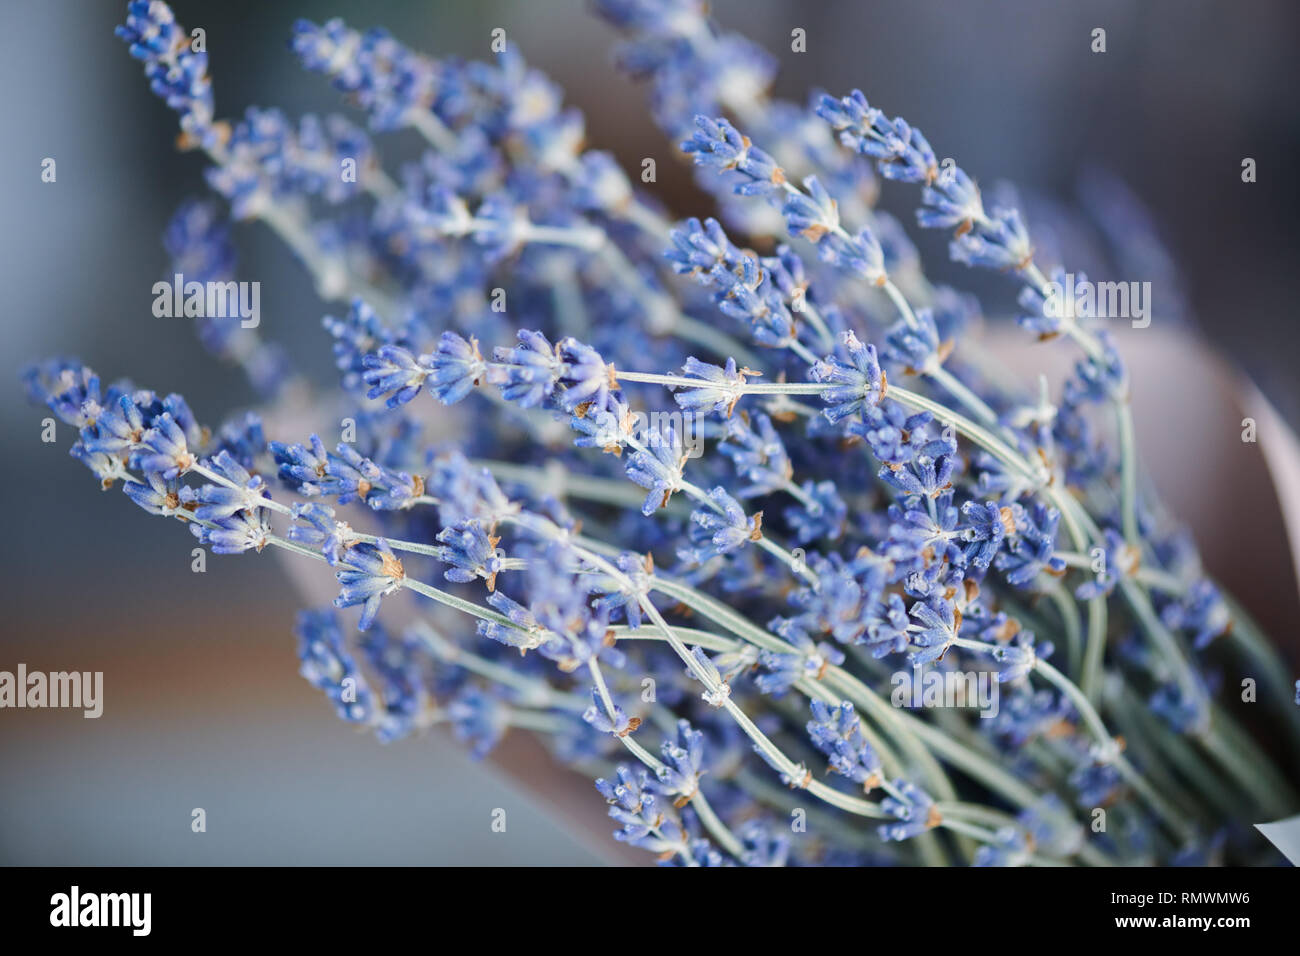 Bunch of dry lavender flowers made up of group of thin branches covered with tiny blossom Stock Photo